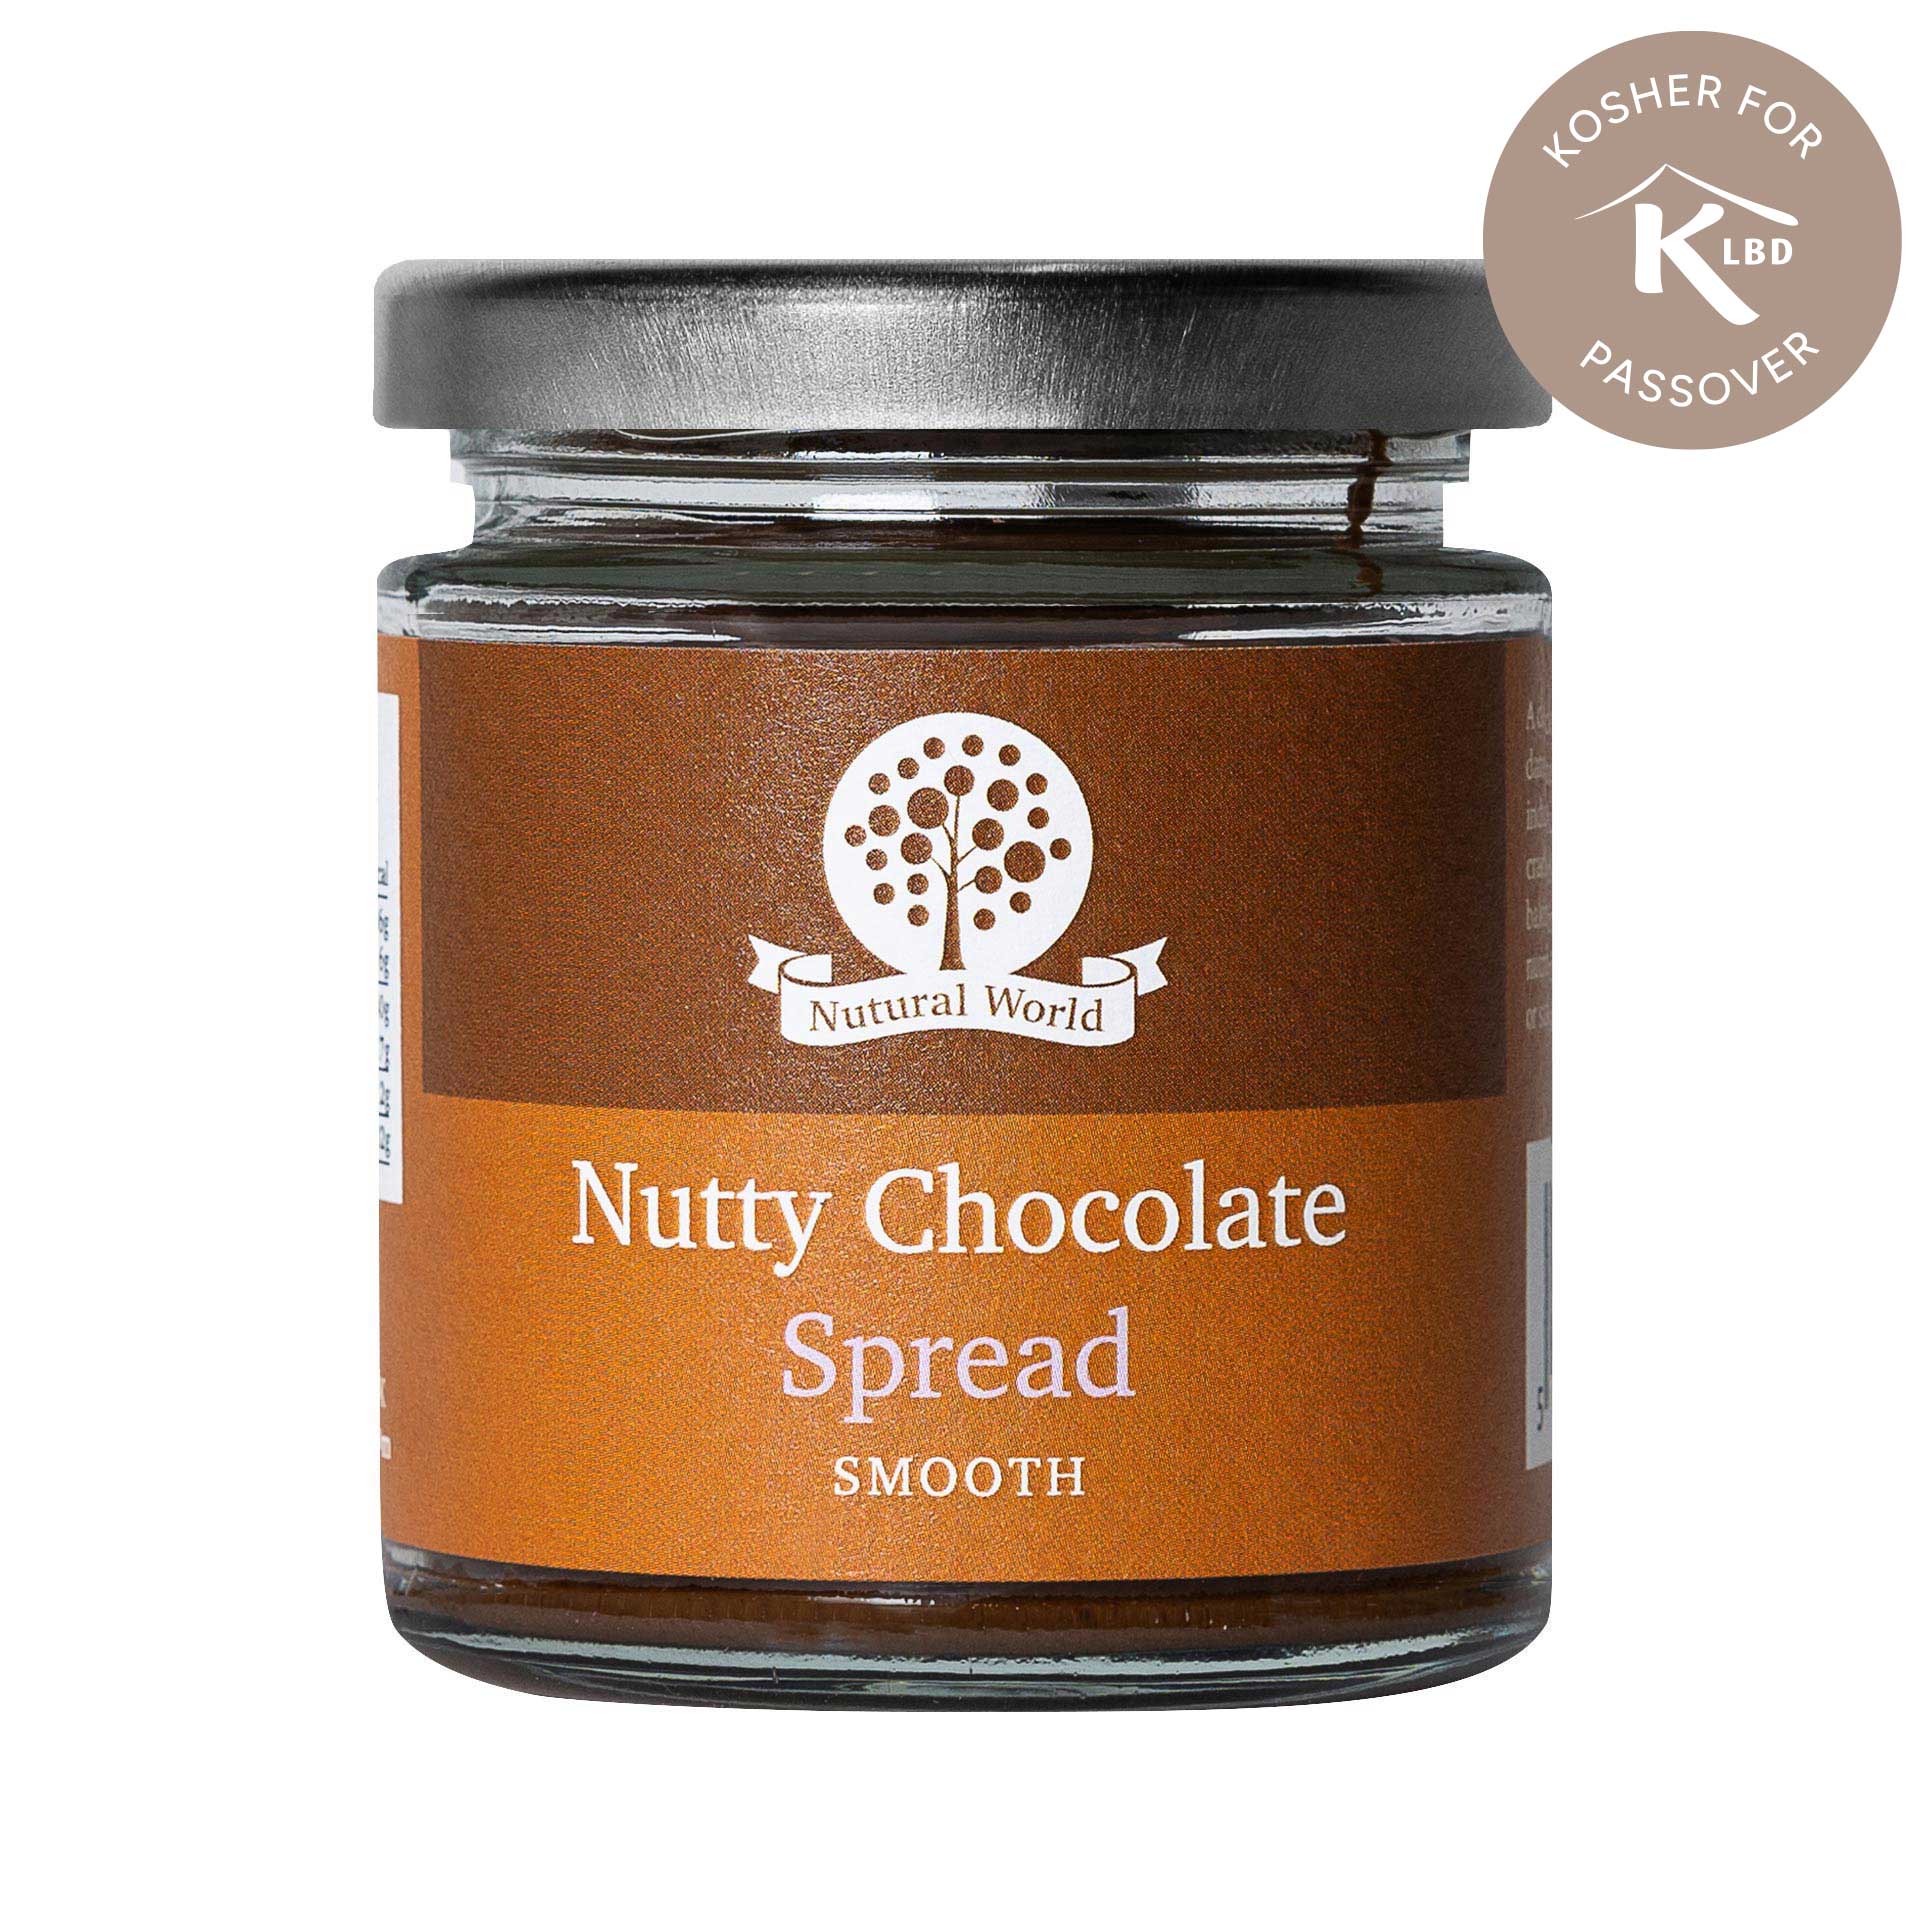 Nutty Chocolate Spread - Kosher for Passover